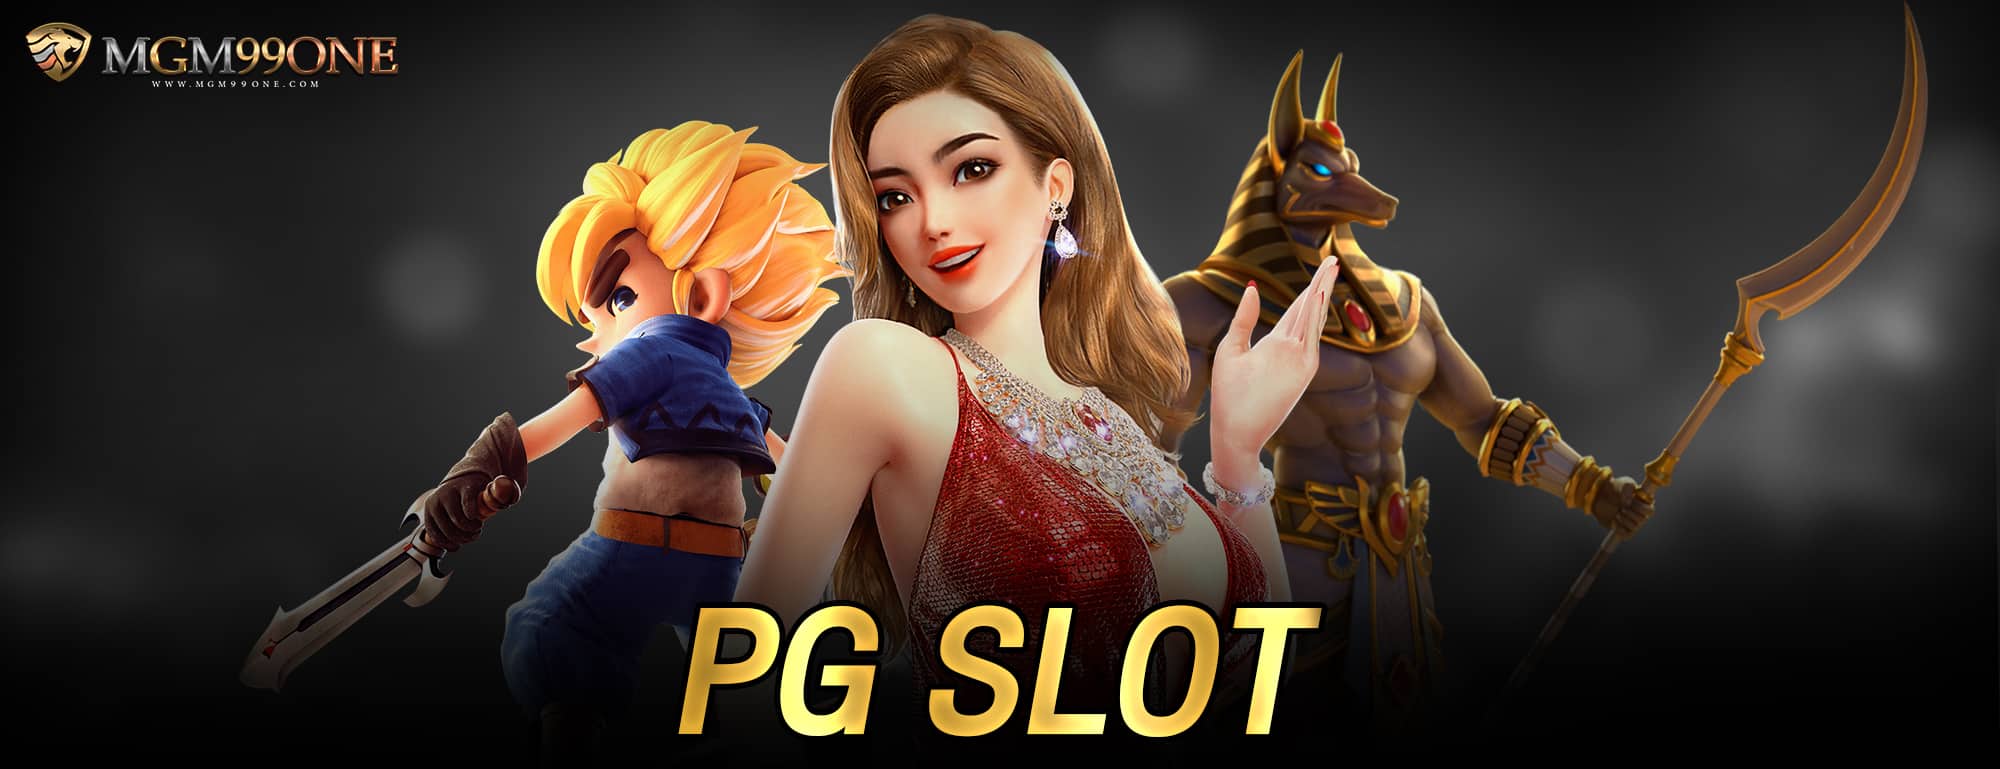 Situs Judi Slot Online Available A Fresh World